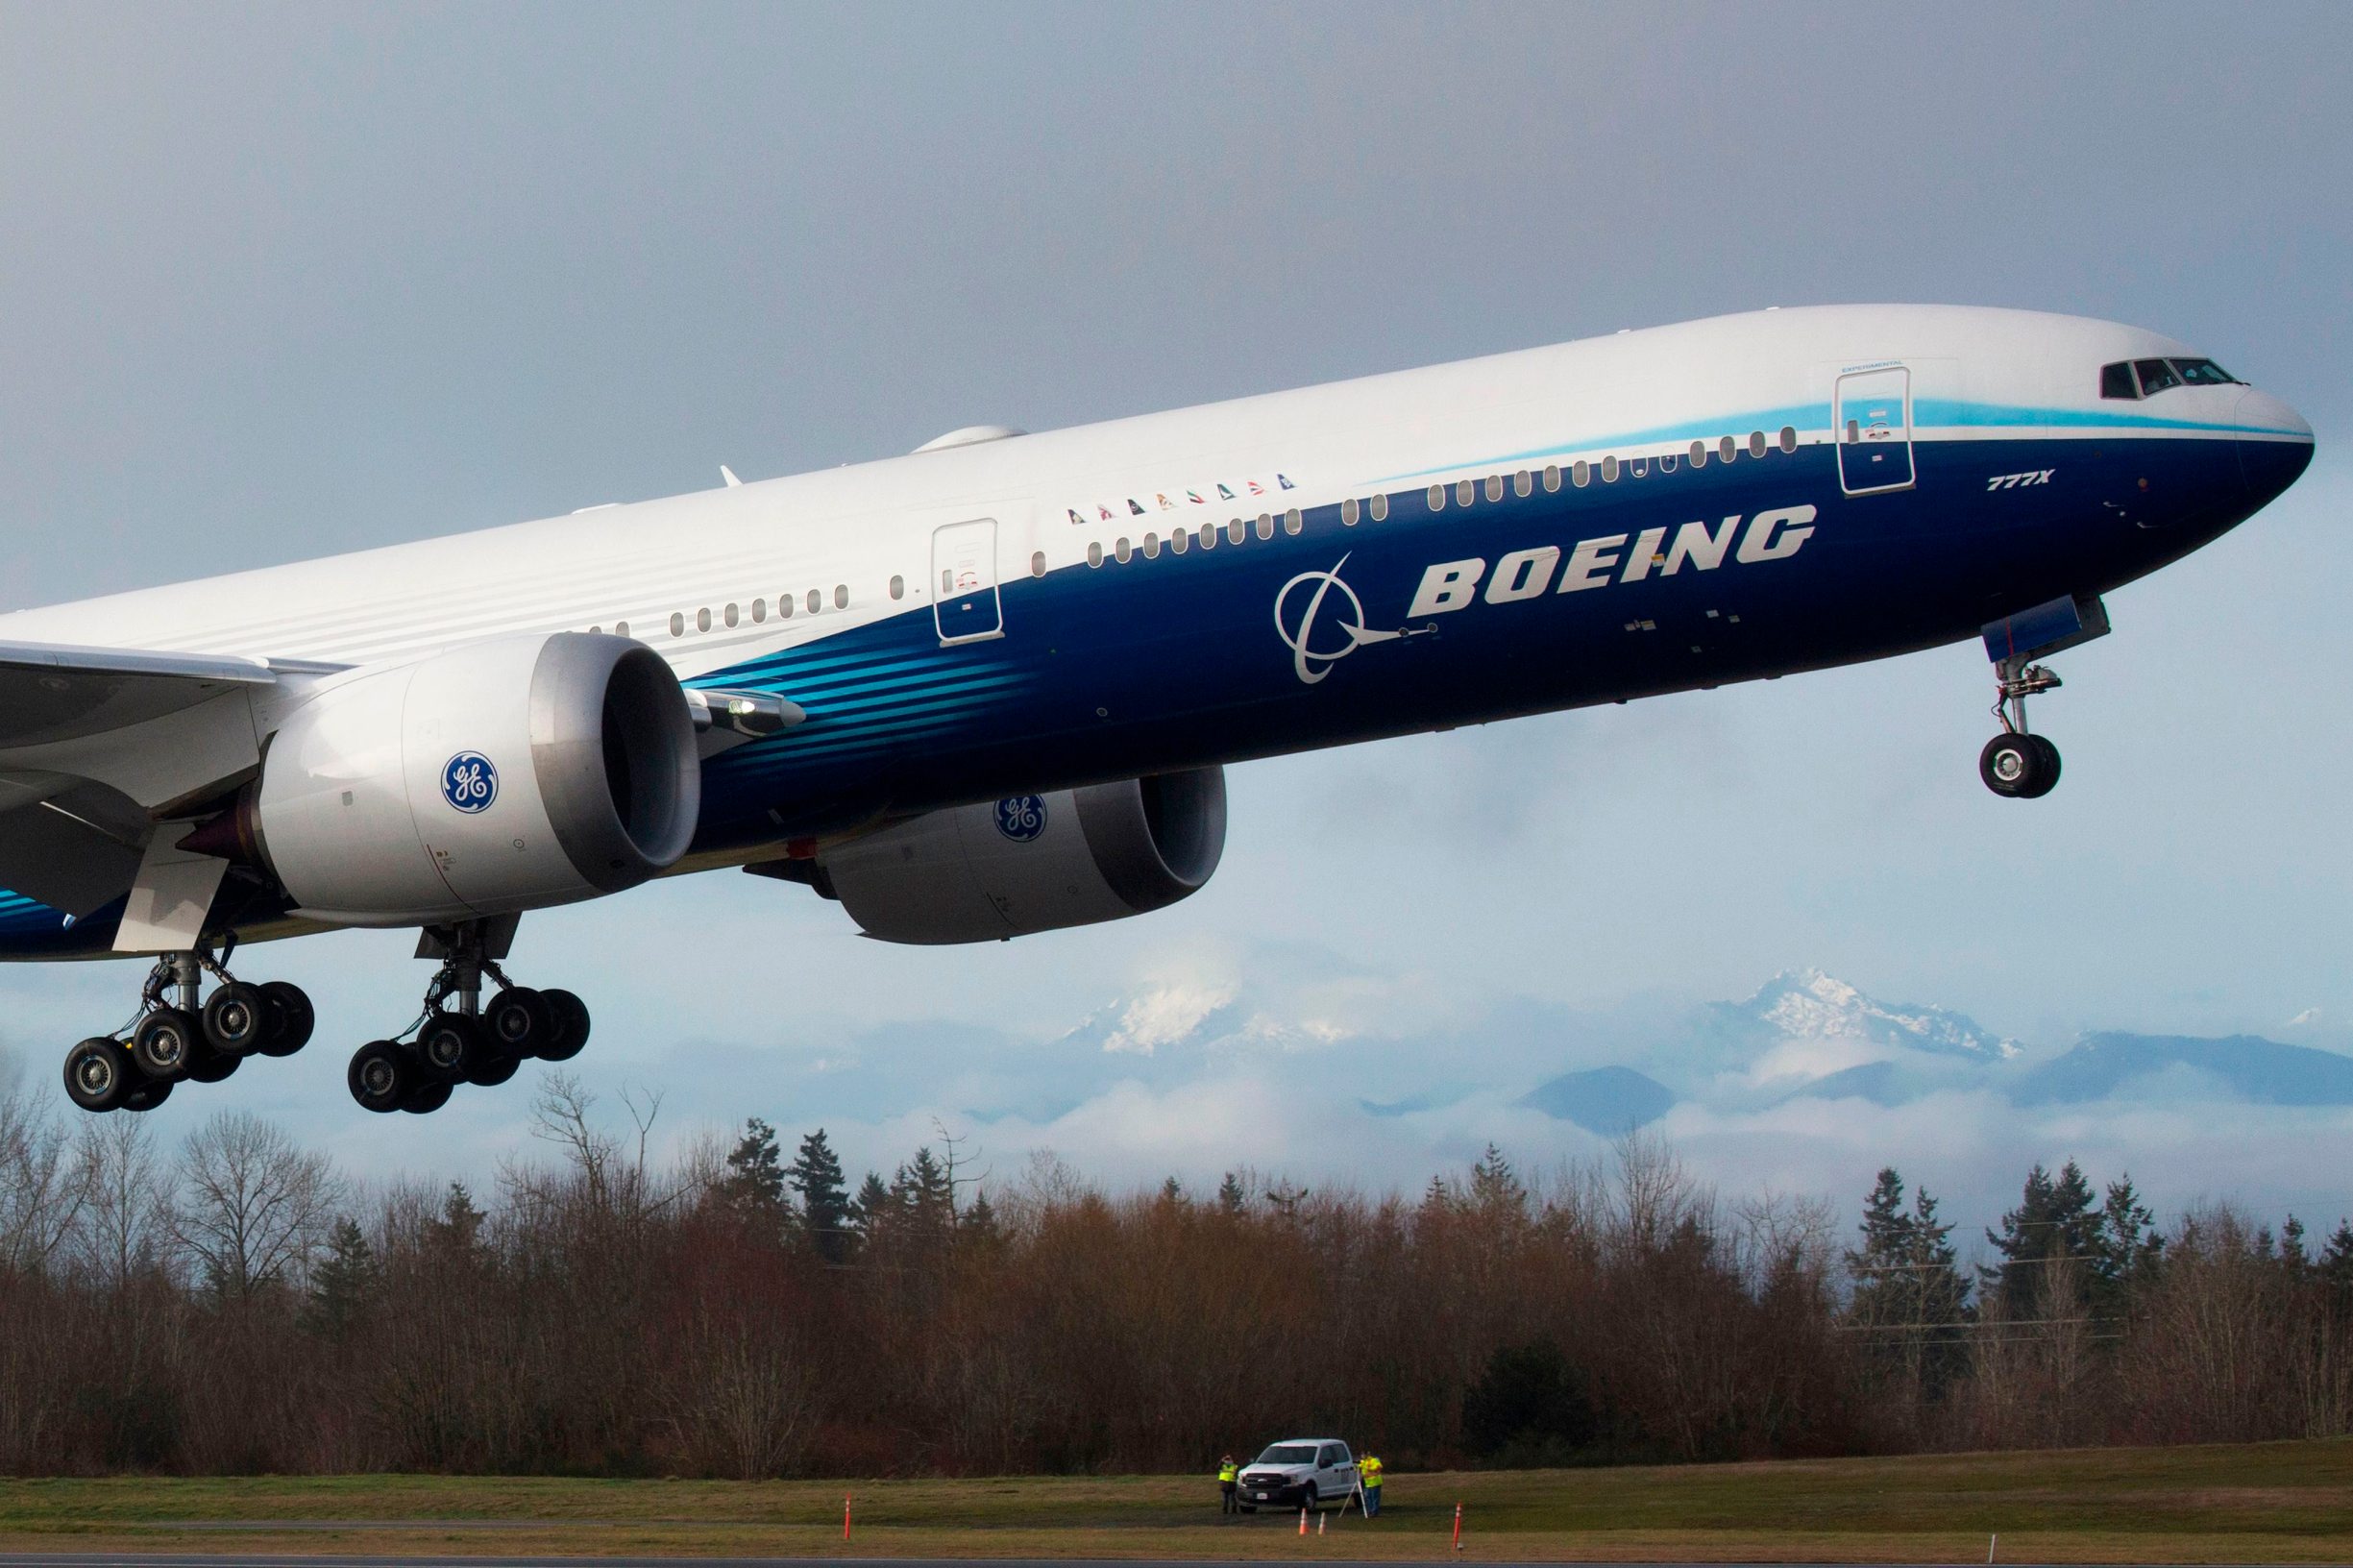 A Boeing 777X airplane takes off on its inaugural flight at Paine Field in Everett, Washington on January 25, 2020. - Boeing's new long-haul 777X airliner made its first flight Saturday, a major step forward for the company whose broader prospects remain clouded by the 737 MAX crisis. The plane took off from a rain-slicked runway a few minutes after 10:00 am local time (1800 GMT), at Paine Field in Everett, Washington, home to Boeing's manufacturing site in the northwestern US. (Photo by Jason Redmond / AFP)